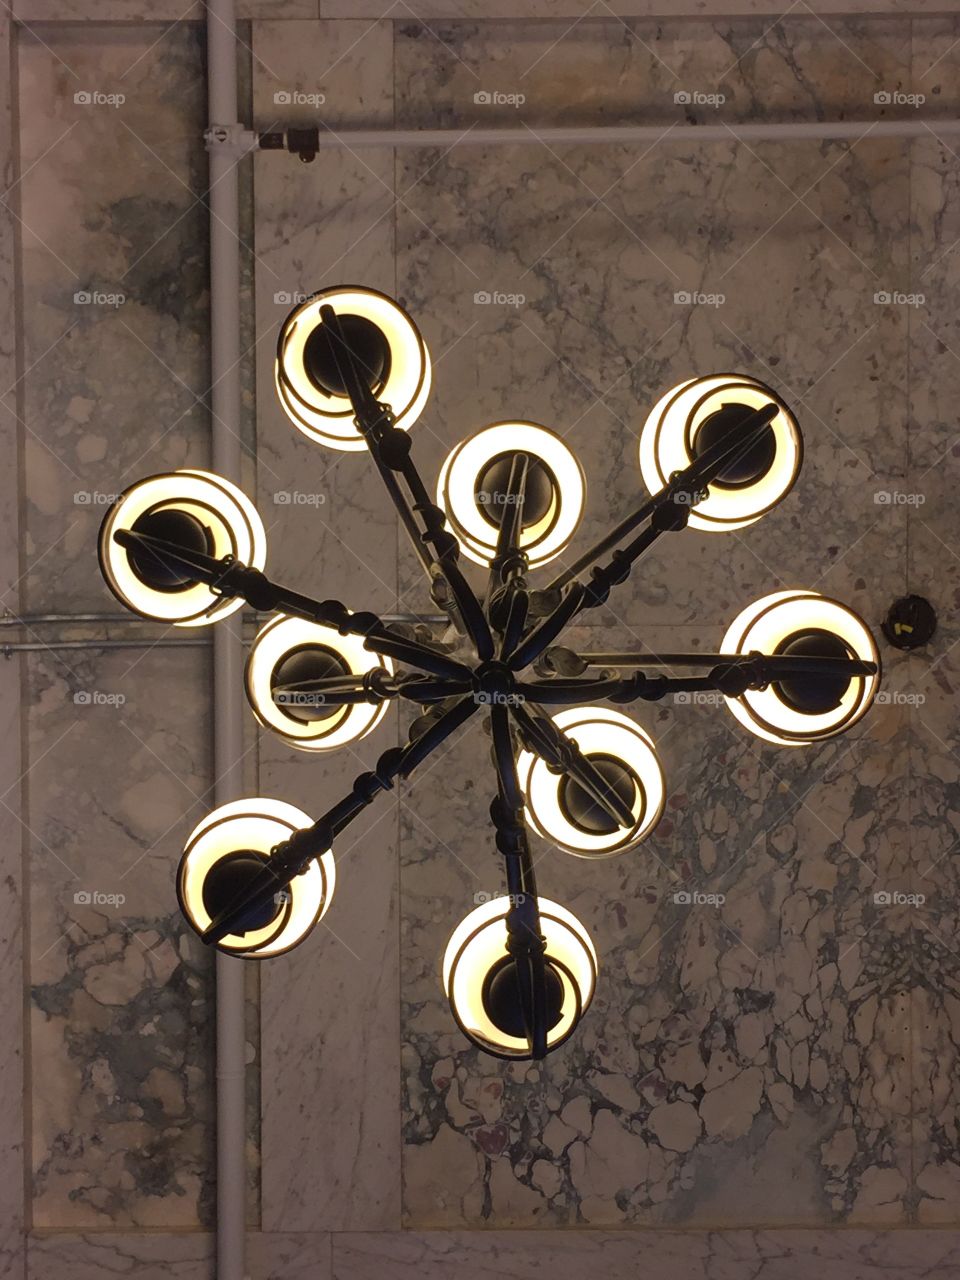 Illuminati.... Looking up in my Lobby - the Bartlett Building is a 1911 Beaux Arts Style. 